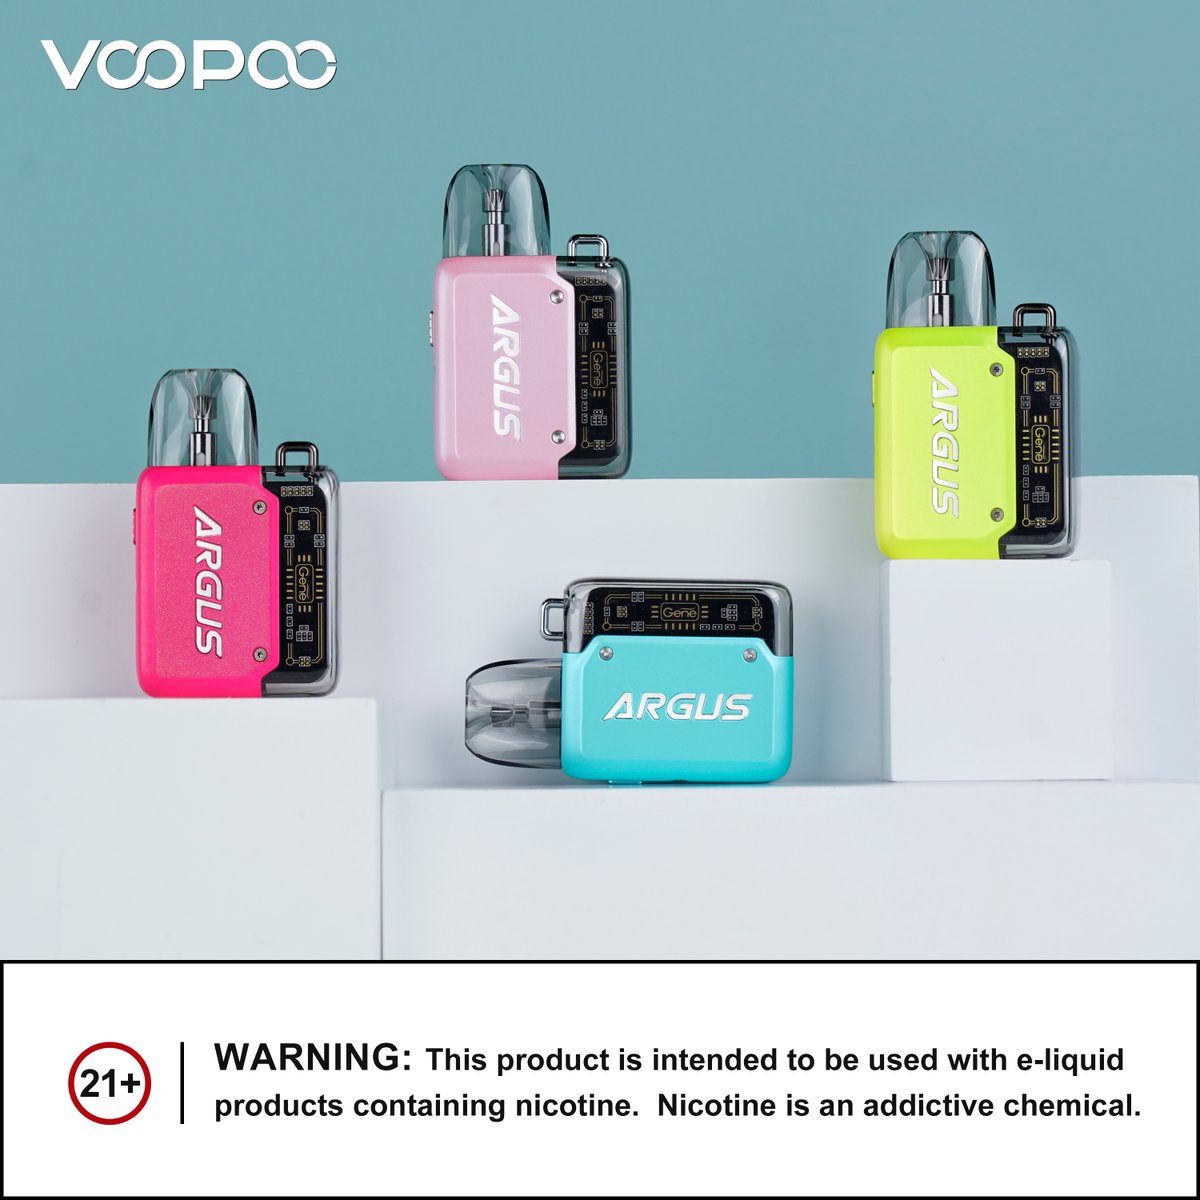 Bright colors #ArgusP1! 💜💛💚💗
Comment below and let me know which one you choose.😜

#voopoo #voopooargus #argusp1 #newcolors #arguspodsfamily #dopamine #passionpink #vapeLife #VapeWithStyle #vapeCommunity